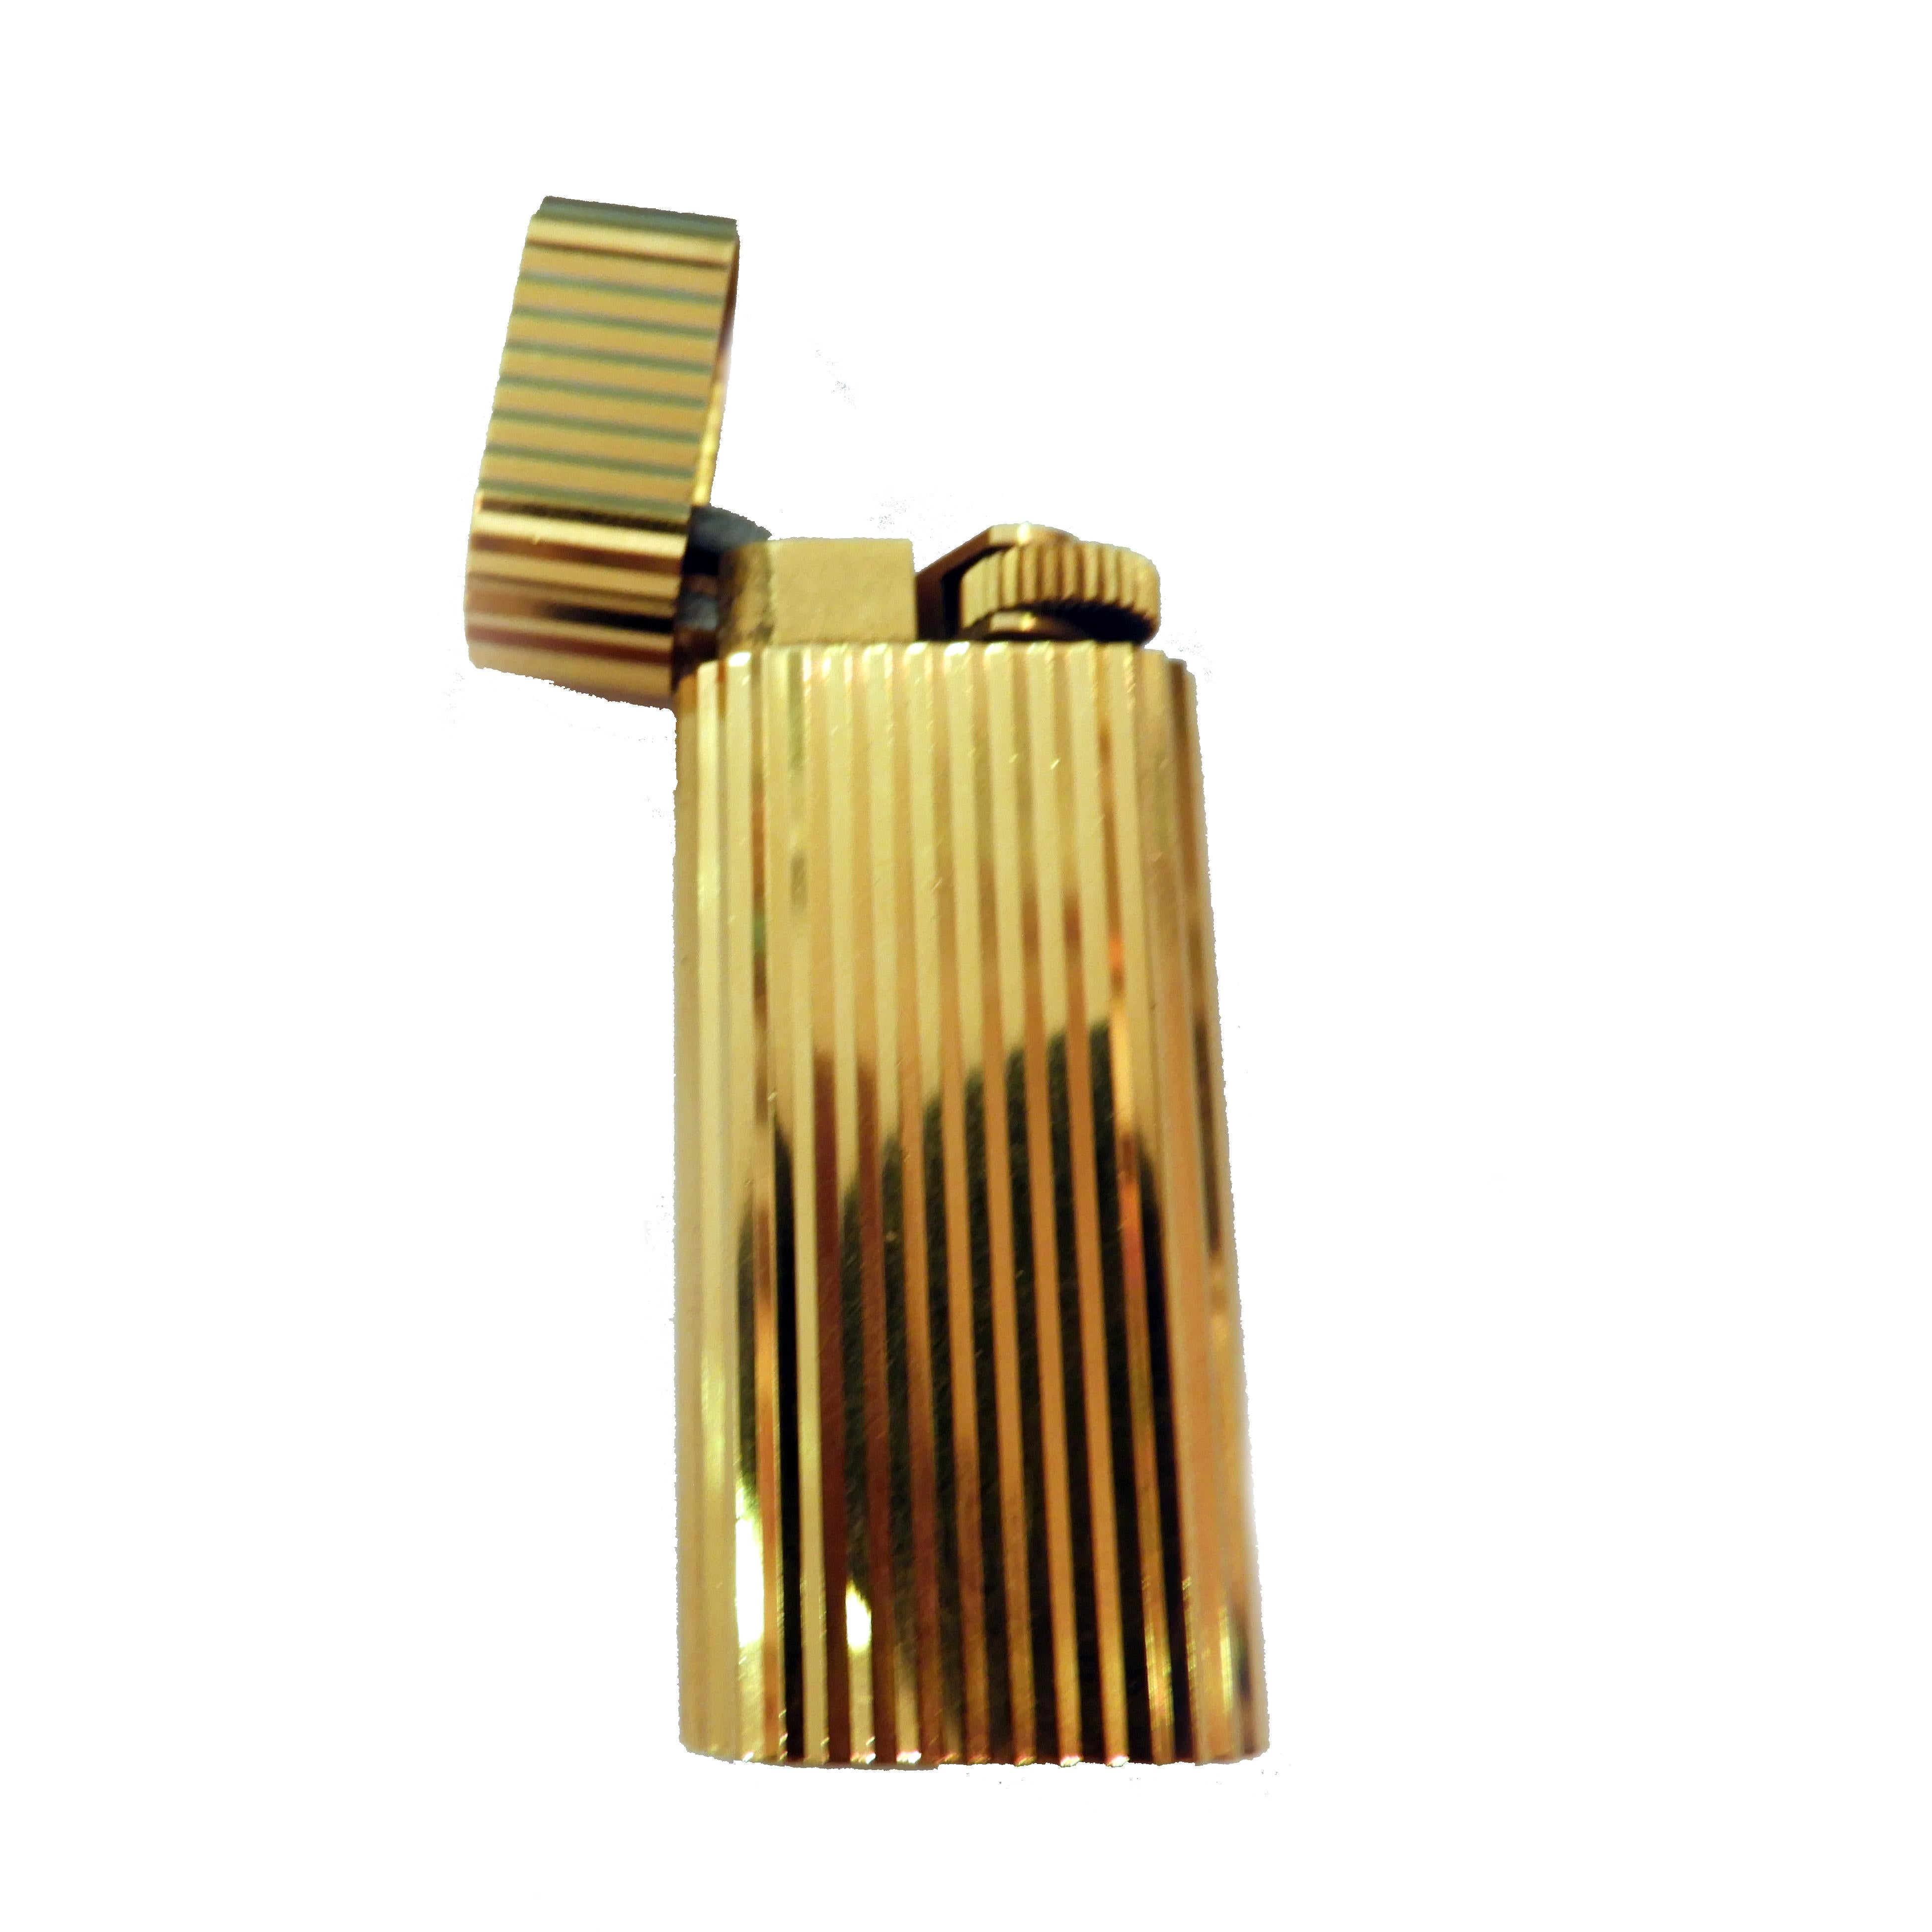 Pocket Le Must de Cartier lighter  in 18-karat gold-plated textured finish a ribbed/fluted design. 
It has a flip-top lid that houses the Swiss-made mechanism. The flint wheel pivots when opened and closed as its designed to be offset and exposed